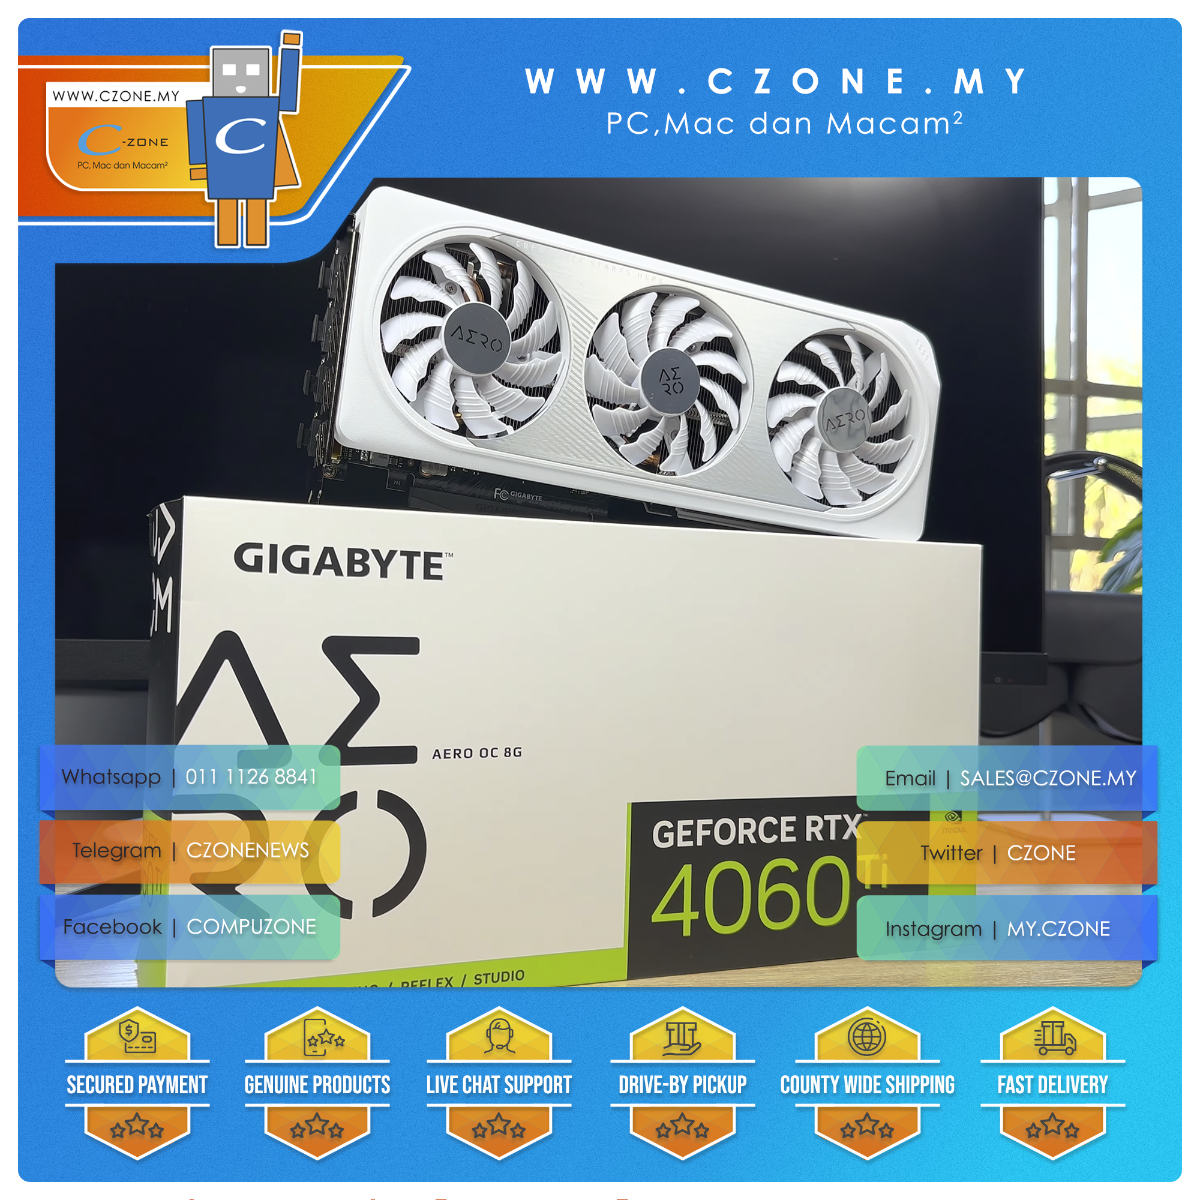 https://czone.my/czone/computer-components/core-components/video-card-video-devices.html?gpu_chipset=9850